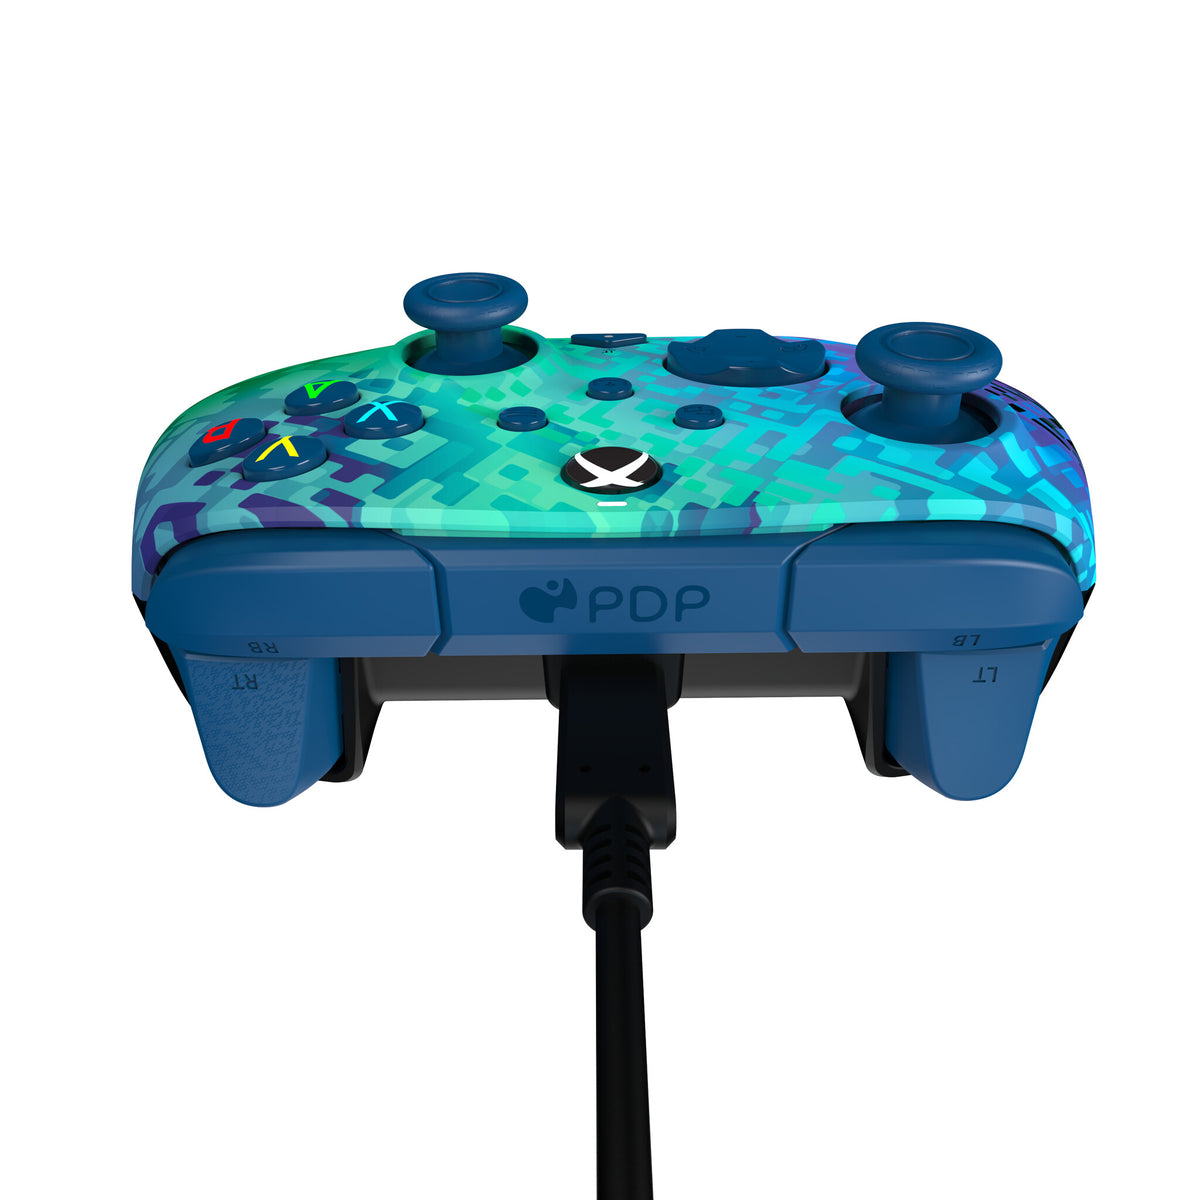 PDP Rematch Advanced Wired Controller for PC / Xbox Series X|S in Glitch Green